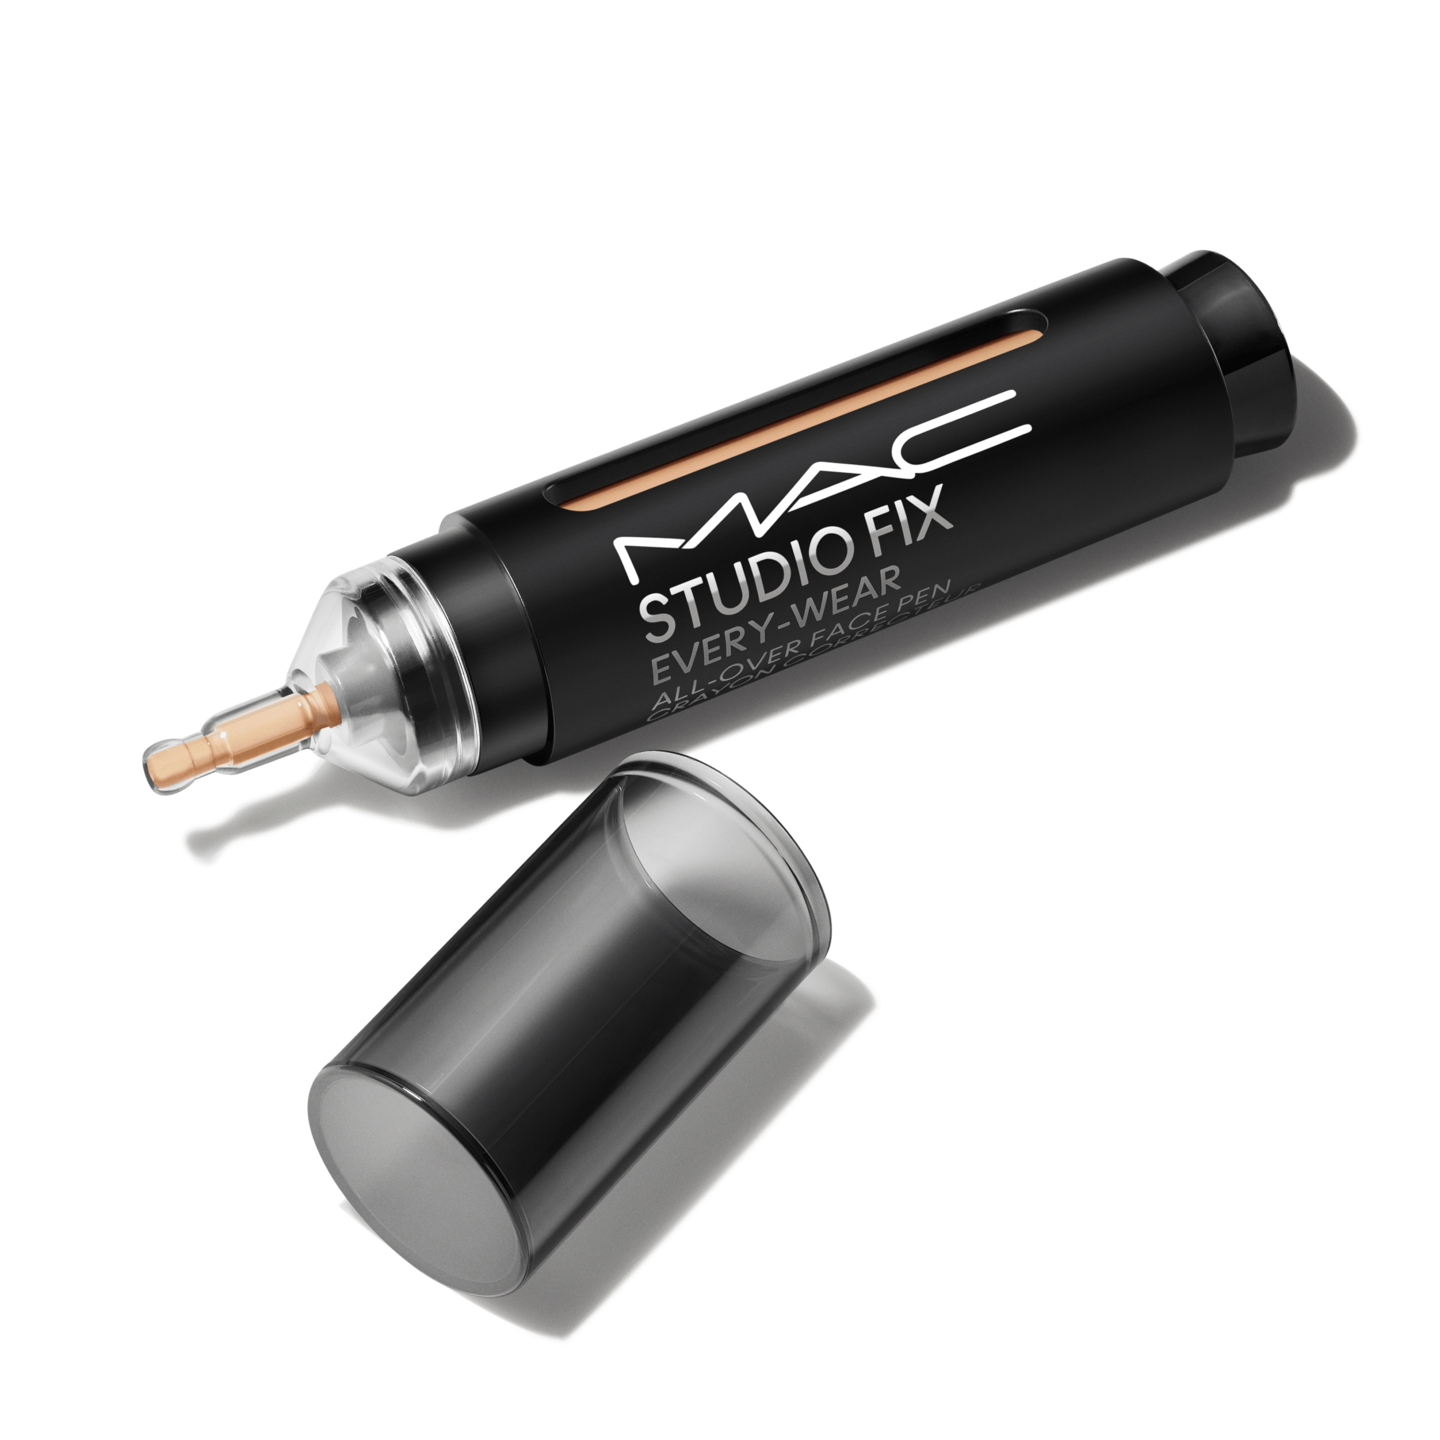 Studio Fix Every-Wear All-Over Face Pen | MAC Cosmetics - Official 